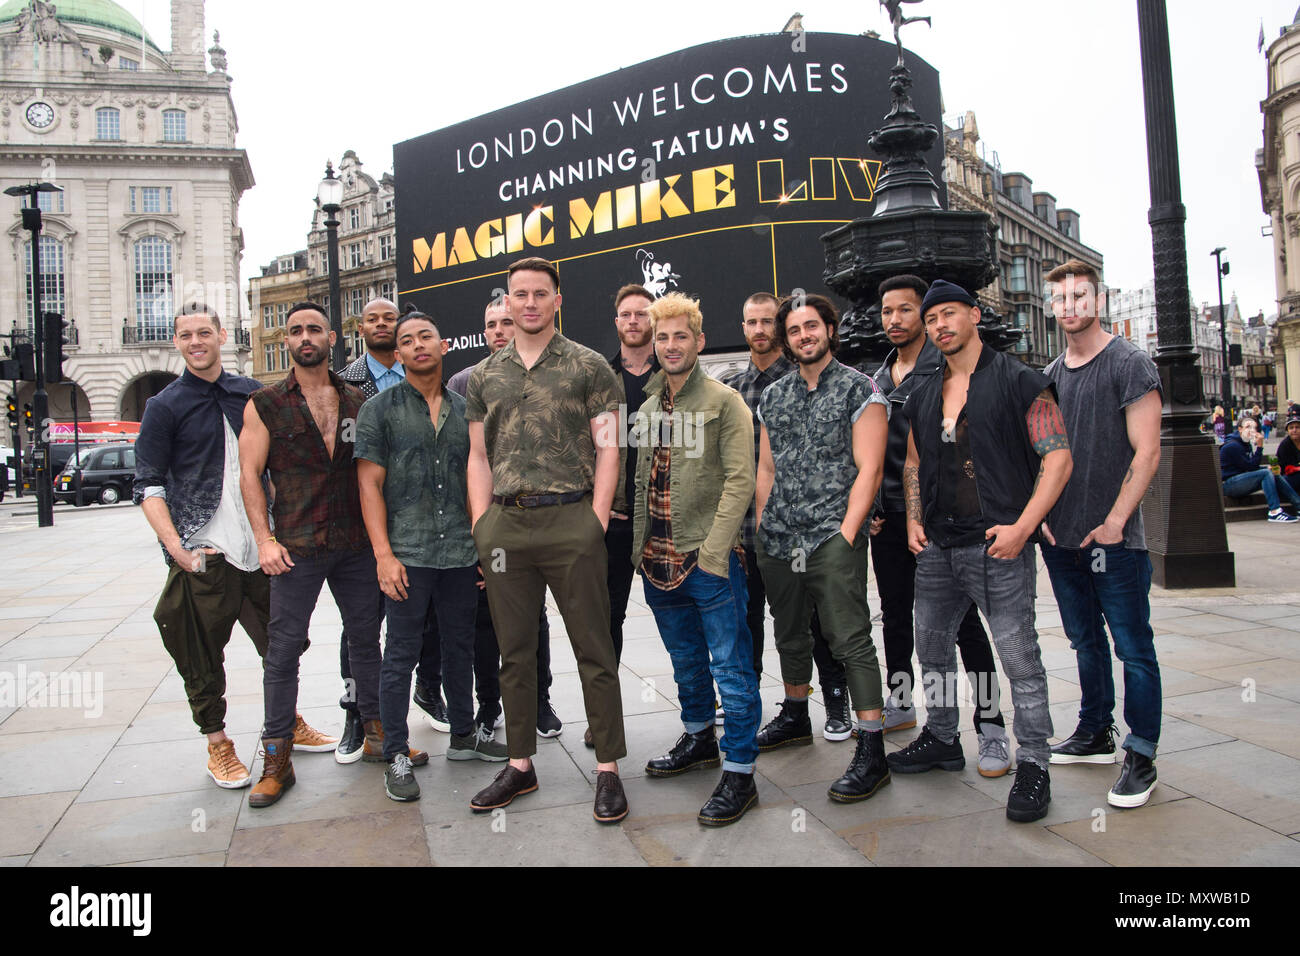 Channing Tatum pictured with dancers from Magic Mike Live in Piccadilly Circus, London, as the giant screens welcome the show to the capital. Stock Photo